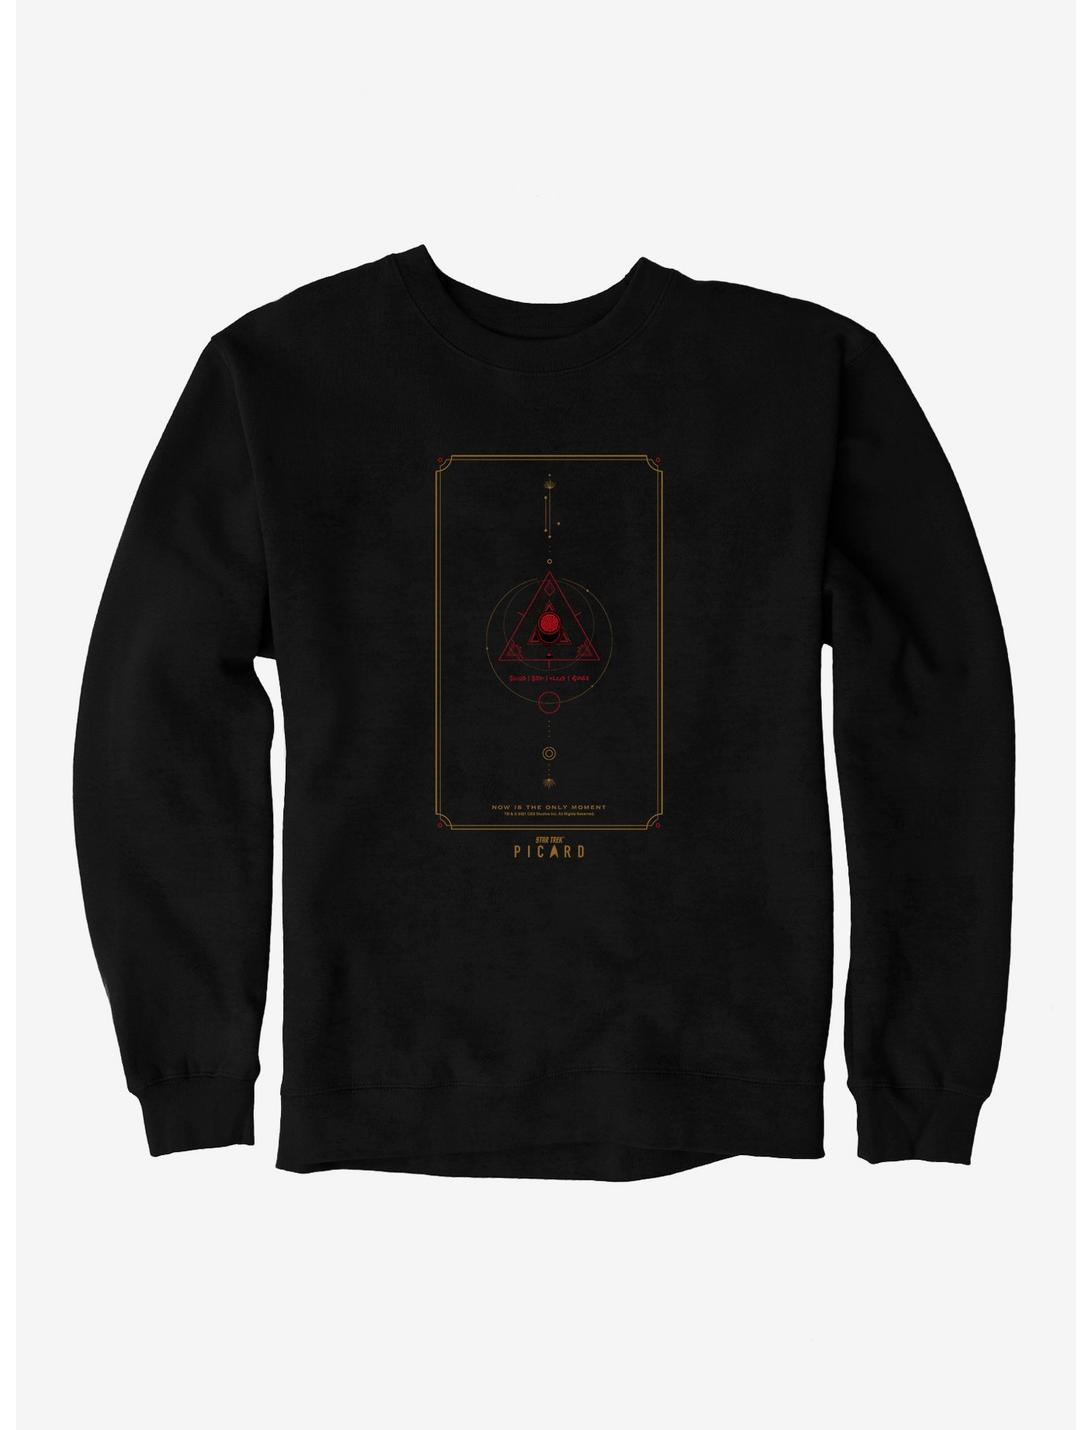 Star Trek: Picard Now Is The Only Moment Sweatshirt, BLACK, hi-res